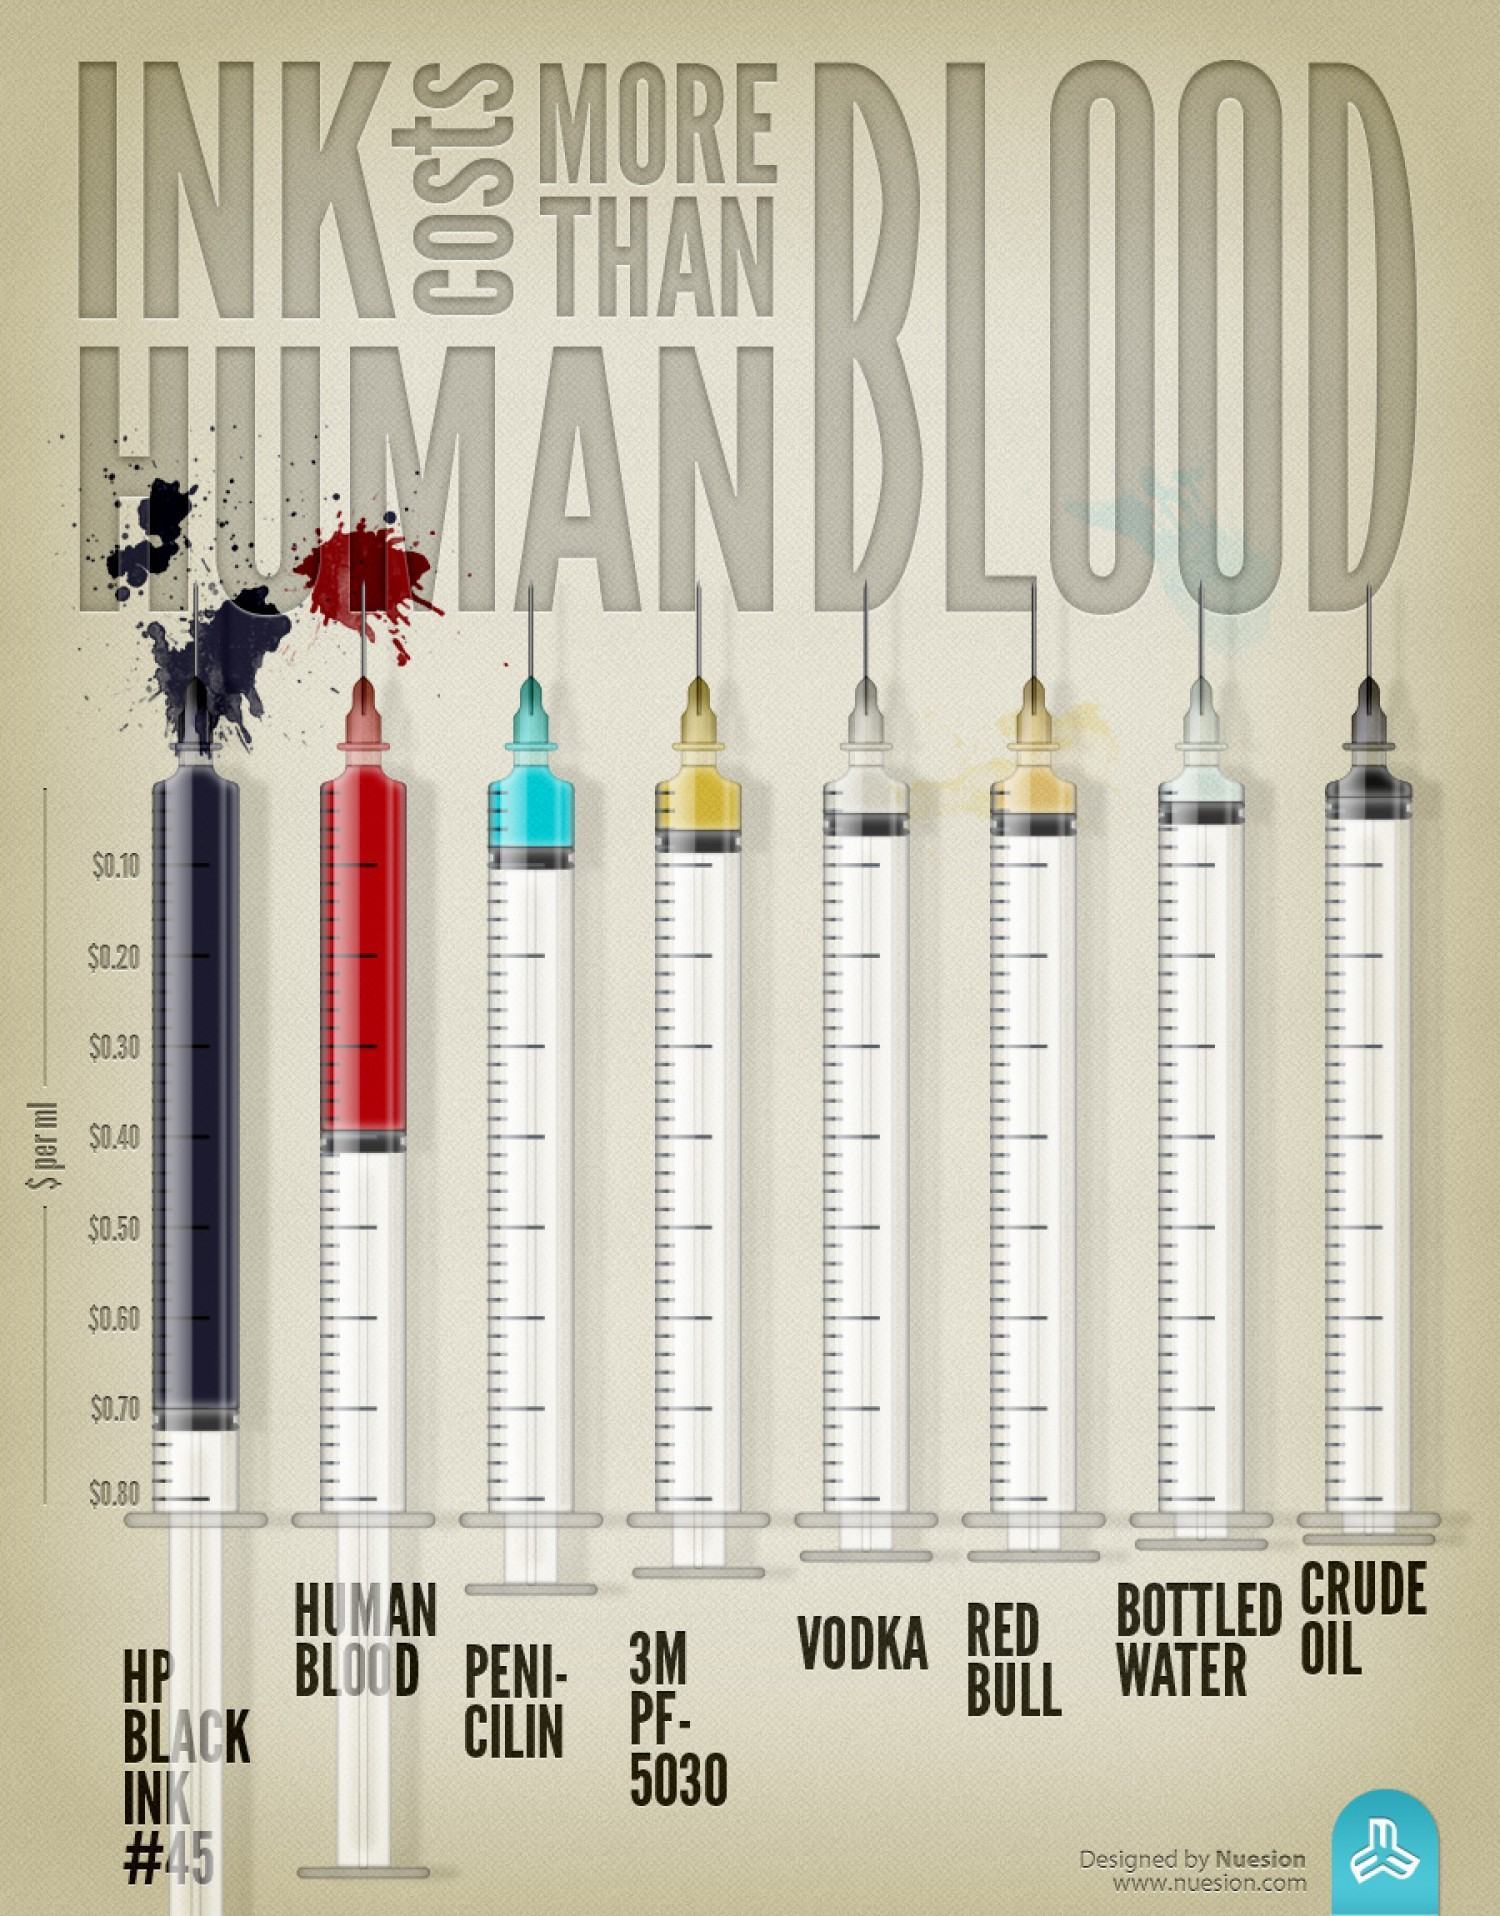 ink-costs-more-than-human-blood_50290ced00807_w1500